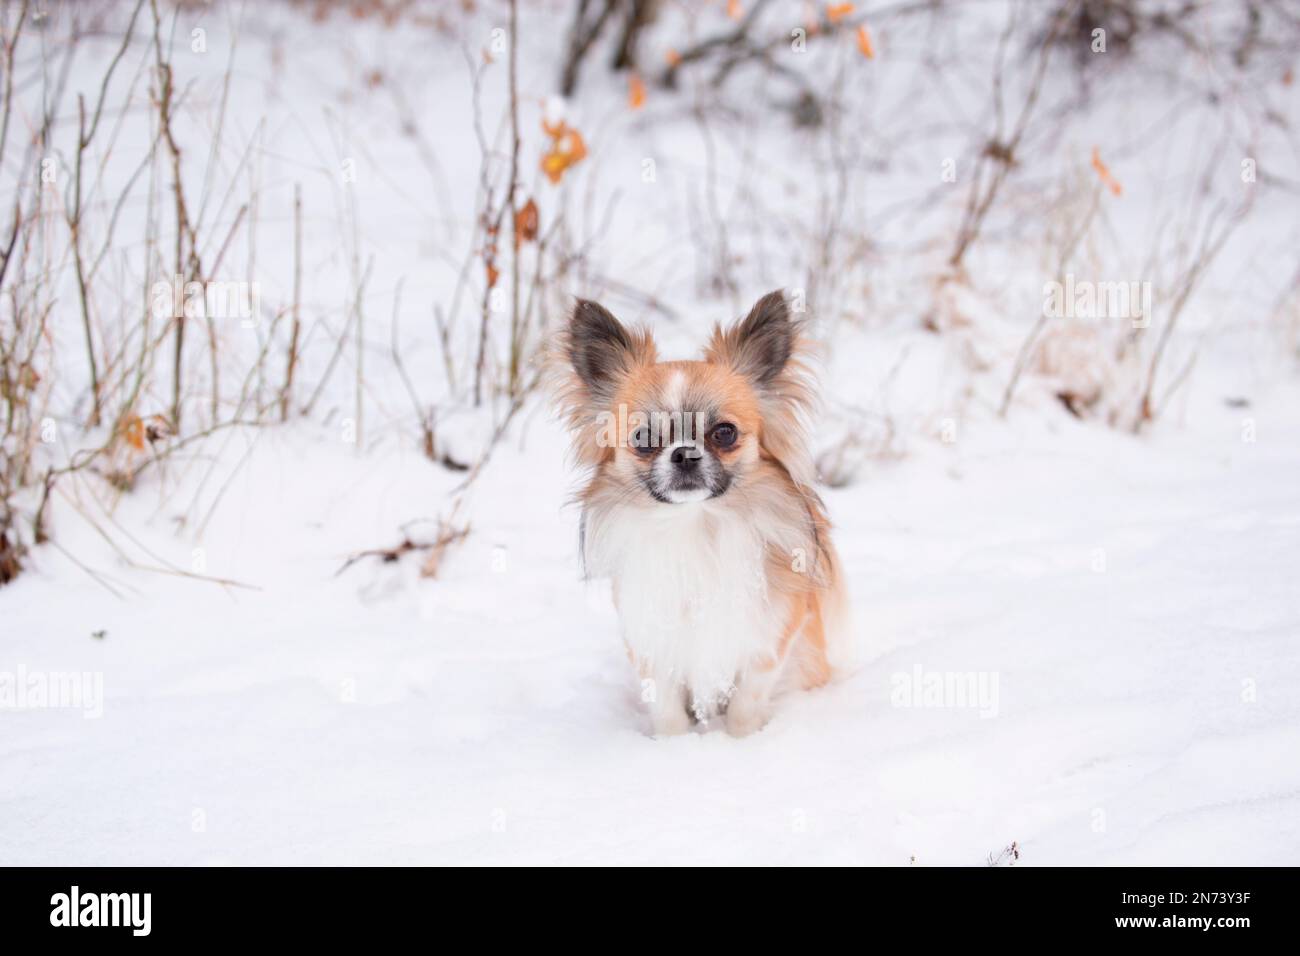 Chihuahua, longhaired, sitting in the white snow, winter scene Stock Photo